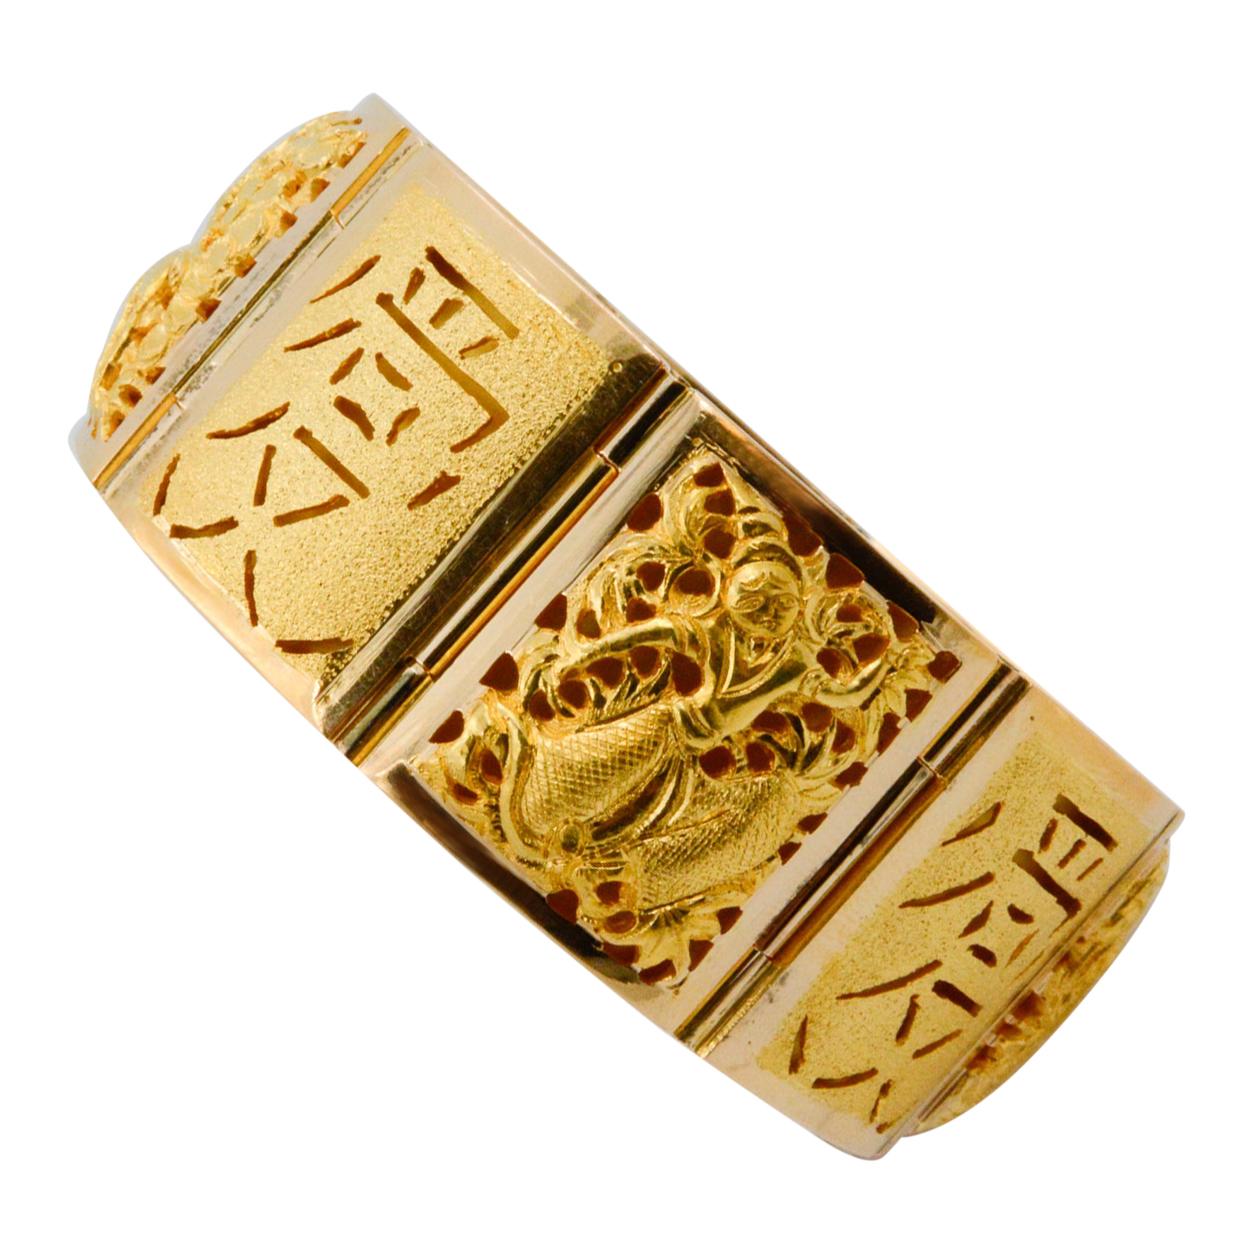 This 18 karat yellow gold Asian bracelet features four season design panels among the total eight panels. The bracelet is wide, measuring at 25mm across. 

